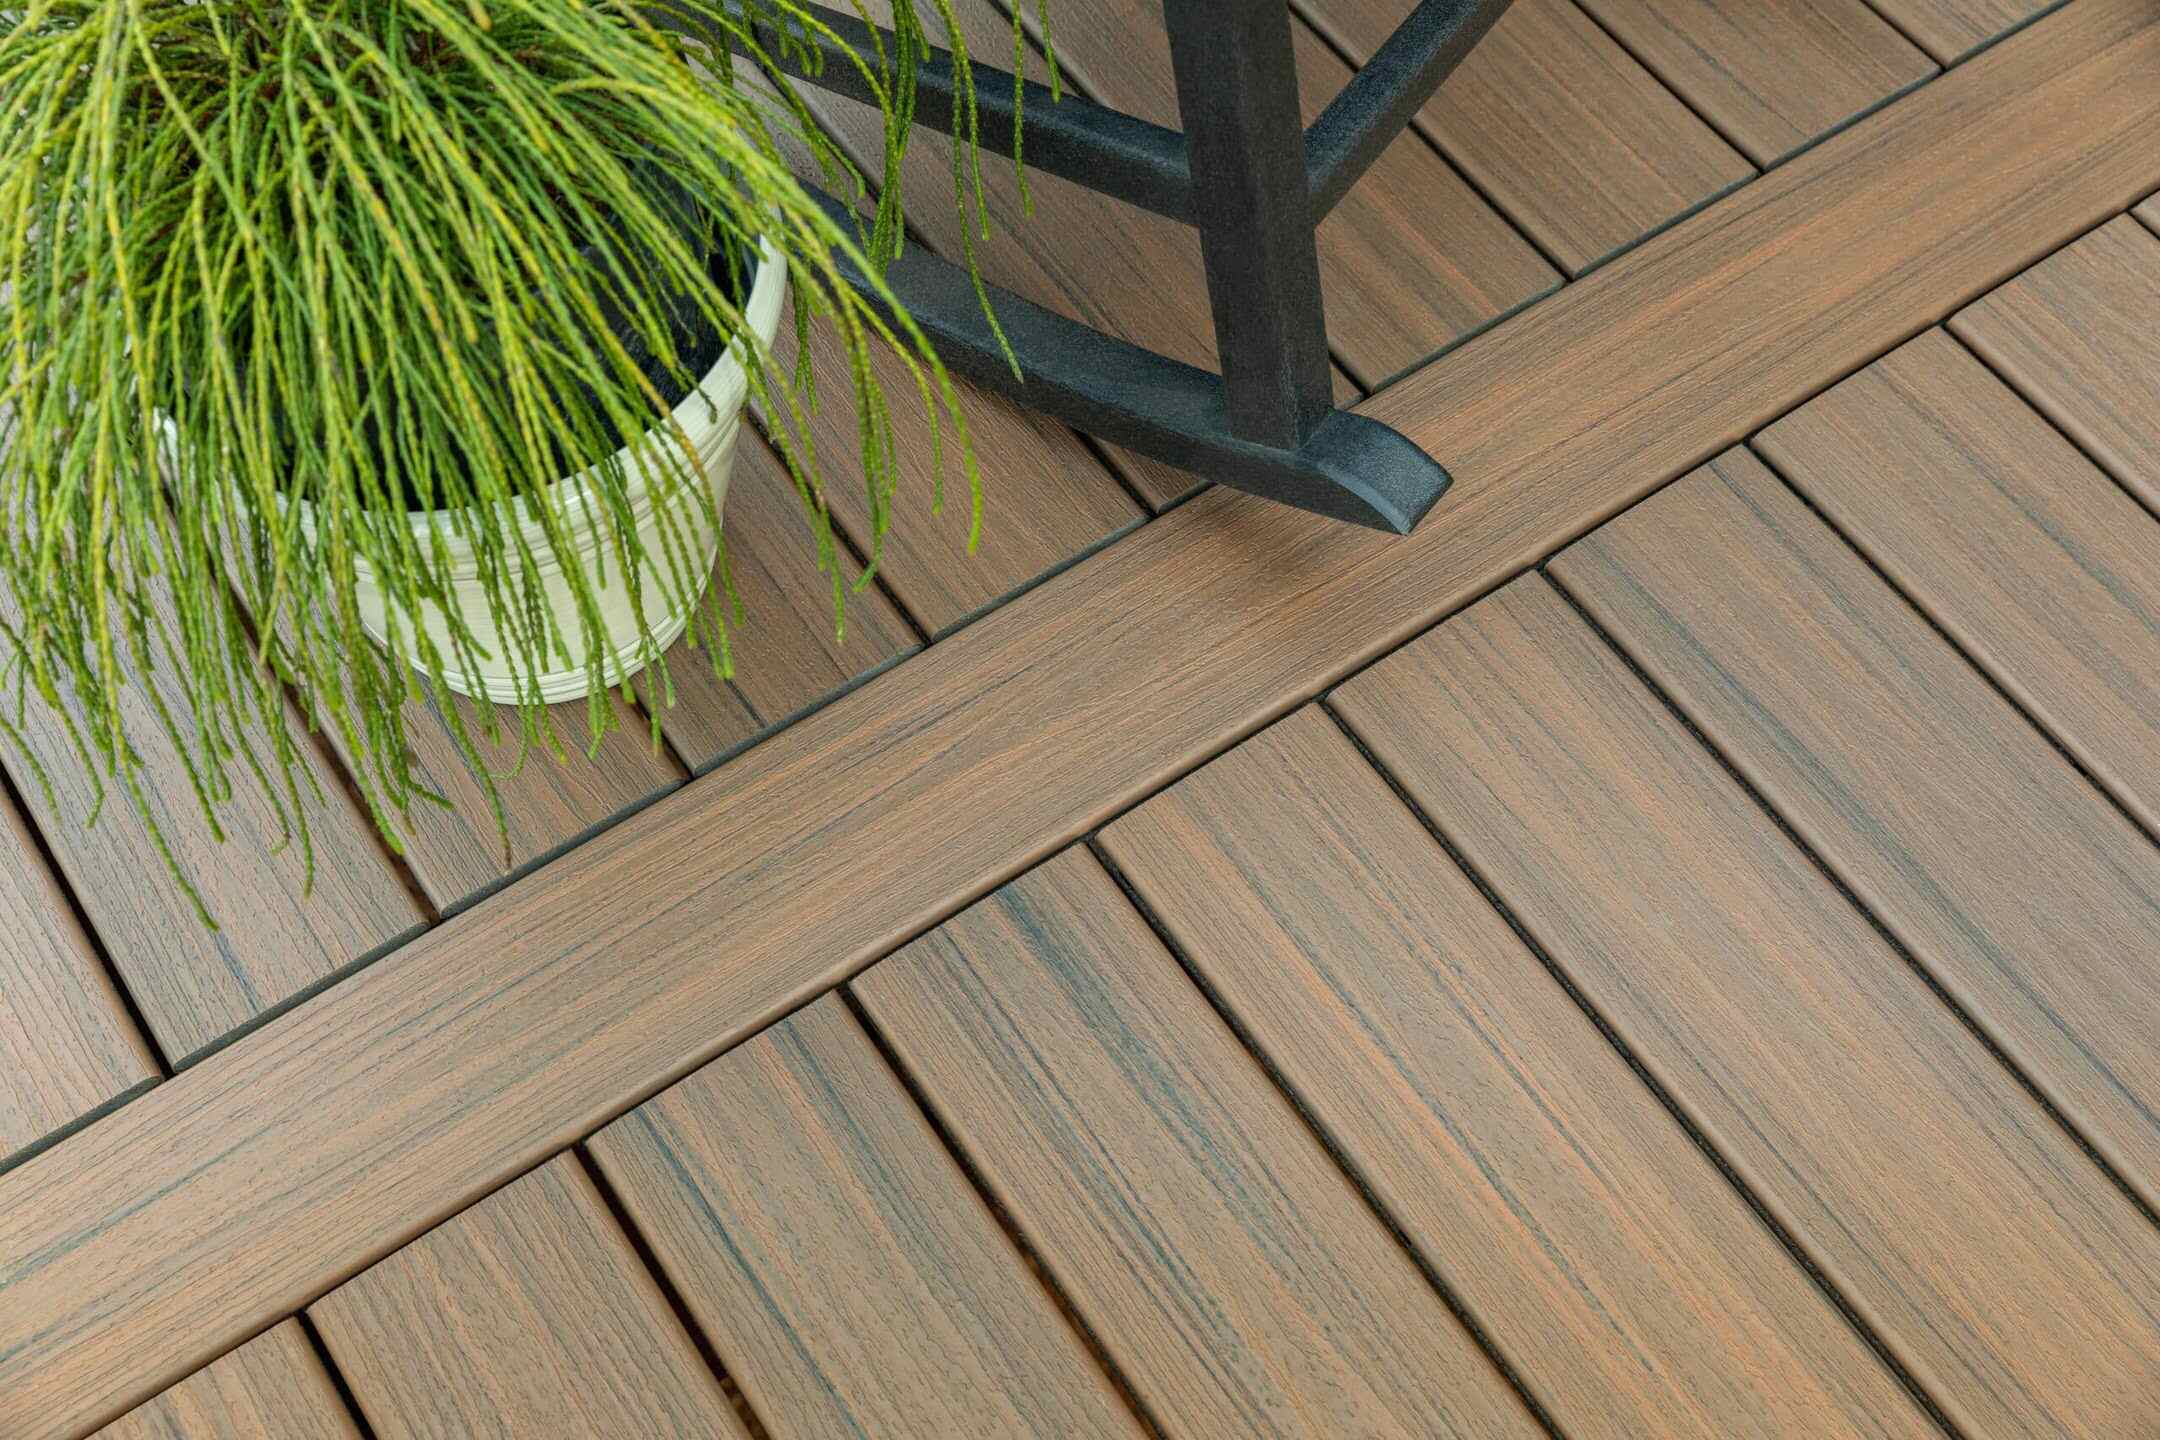 How Long Does Composite Decking Last